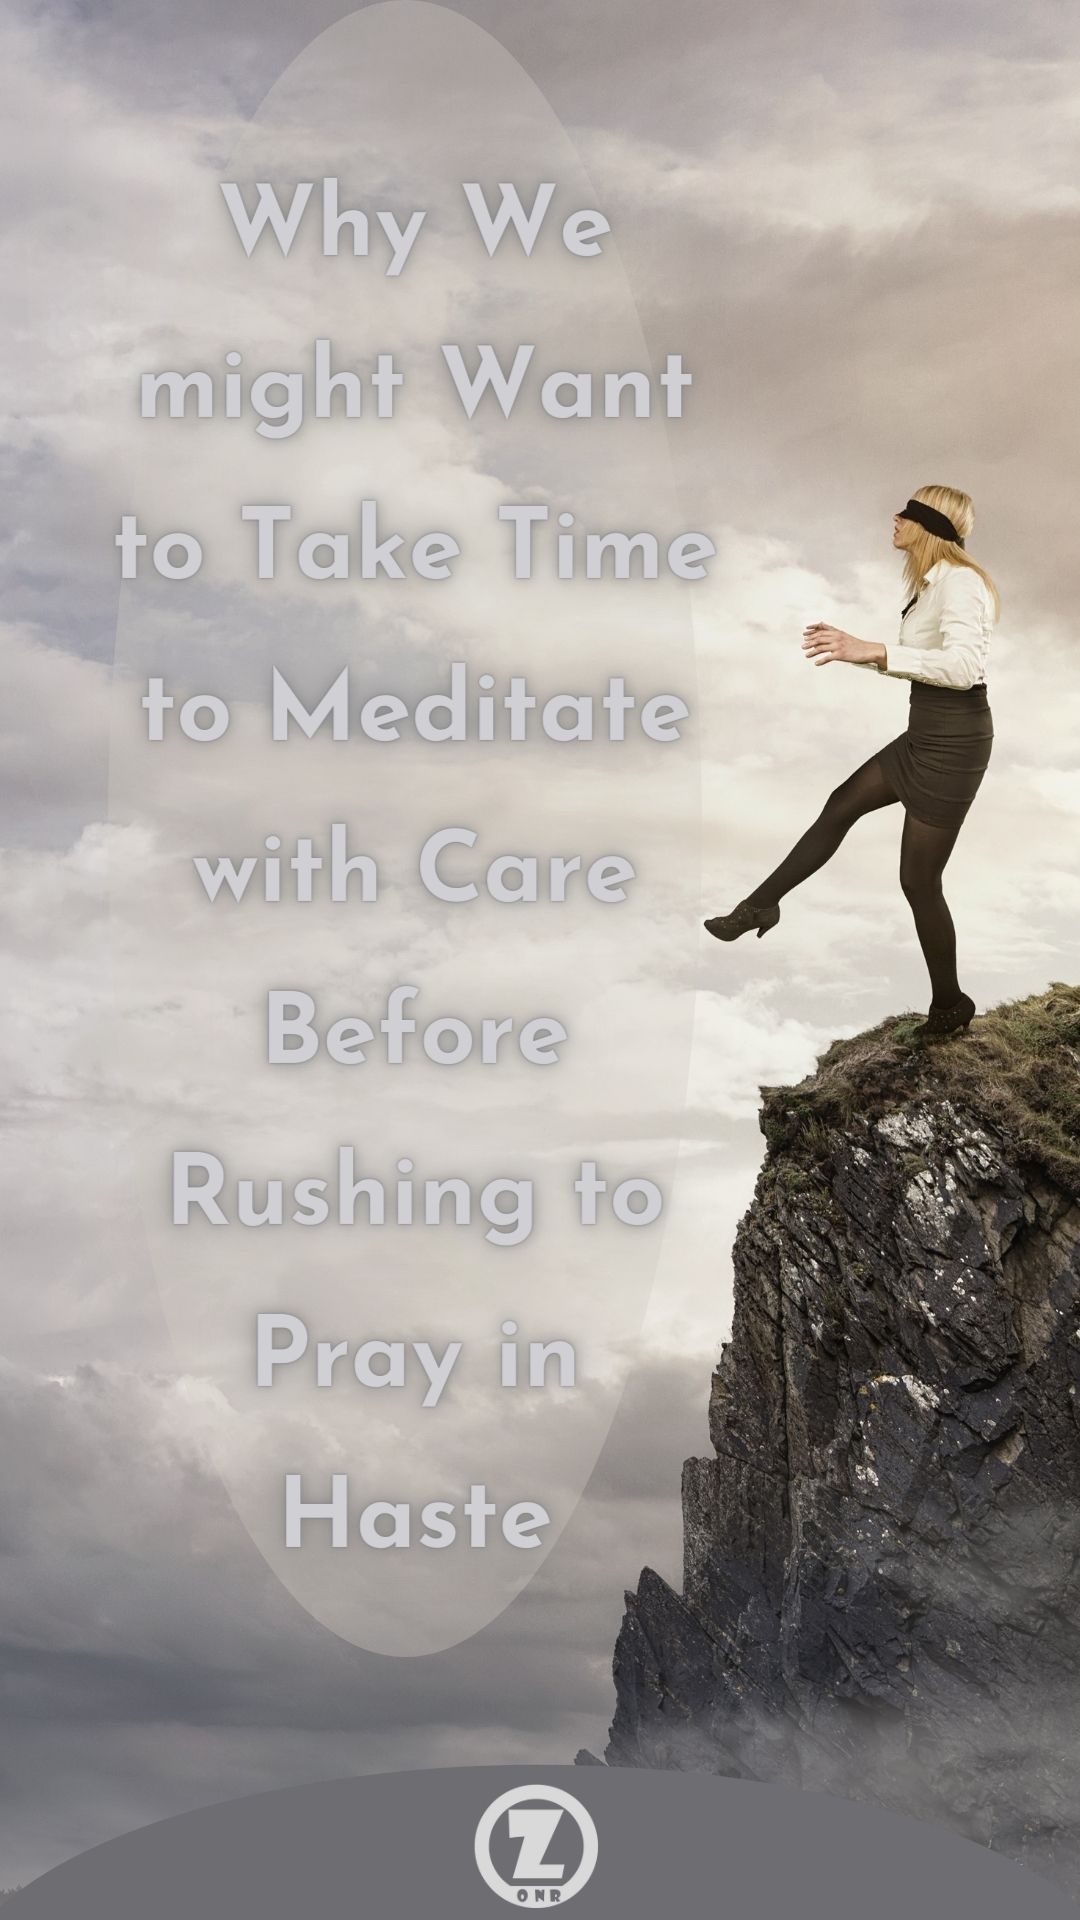 You are currently viewing Why We might Want to Take Time to Meditate with Care Before Rushing to Pray in Haste – Step 11